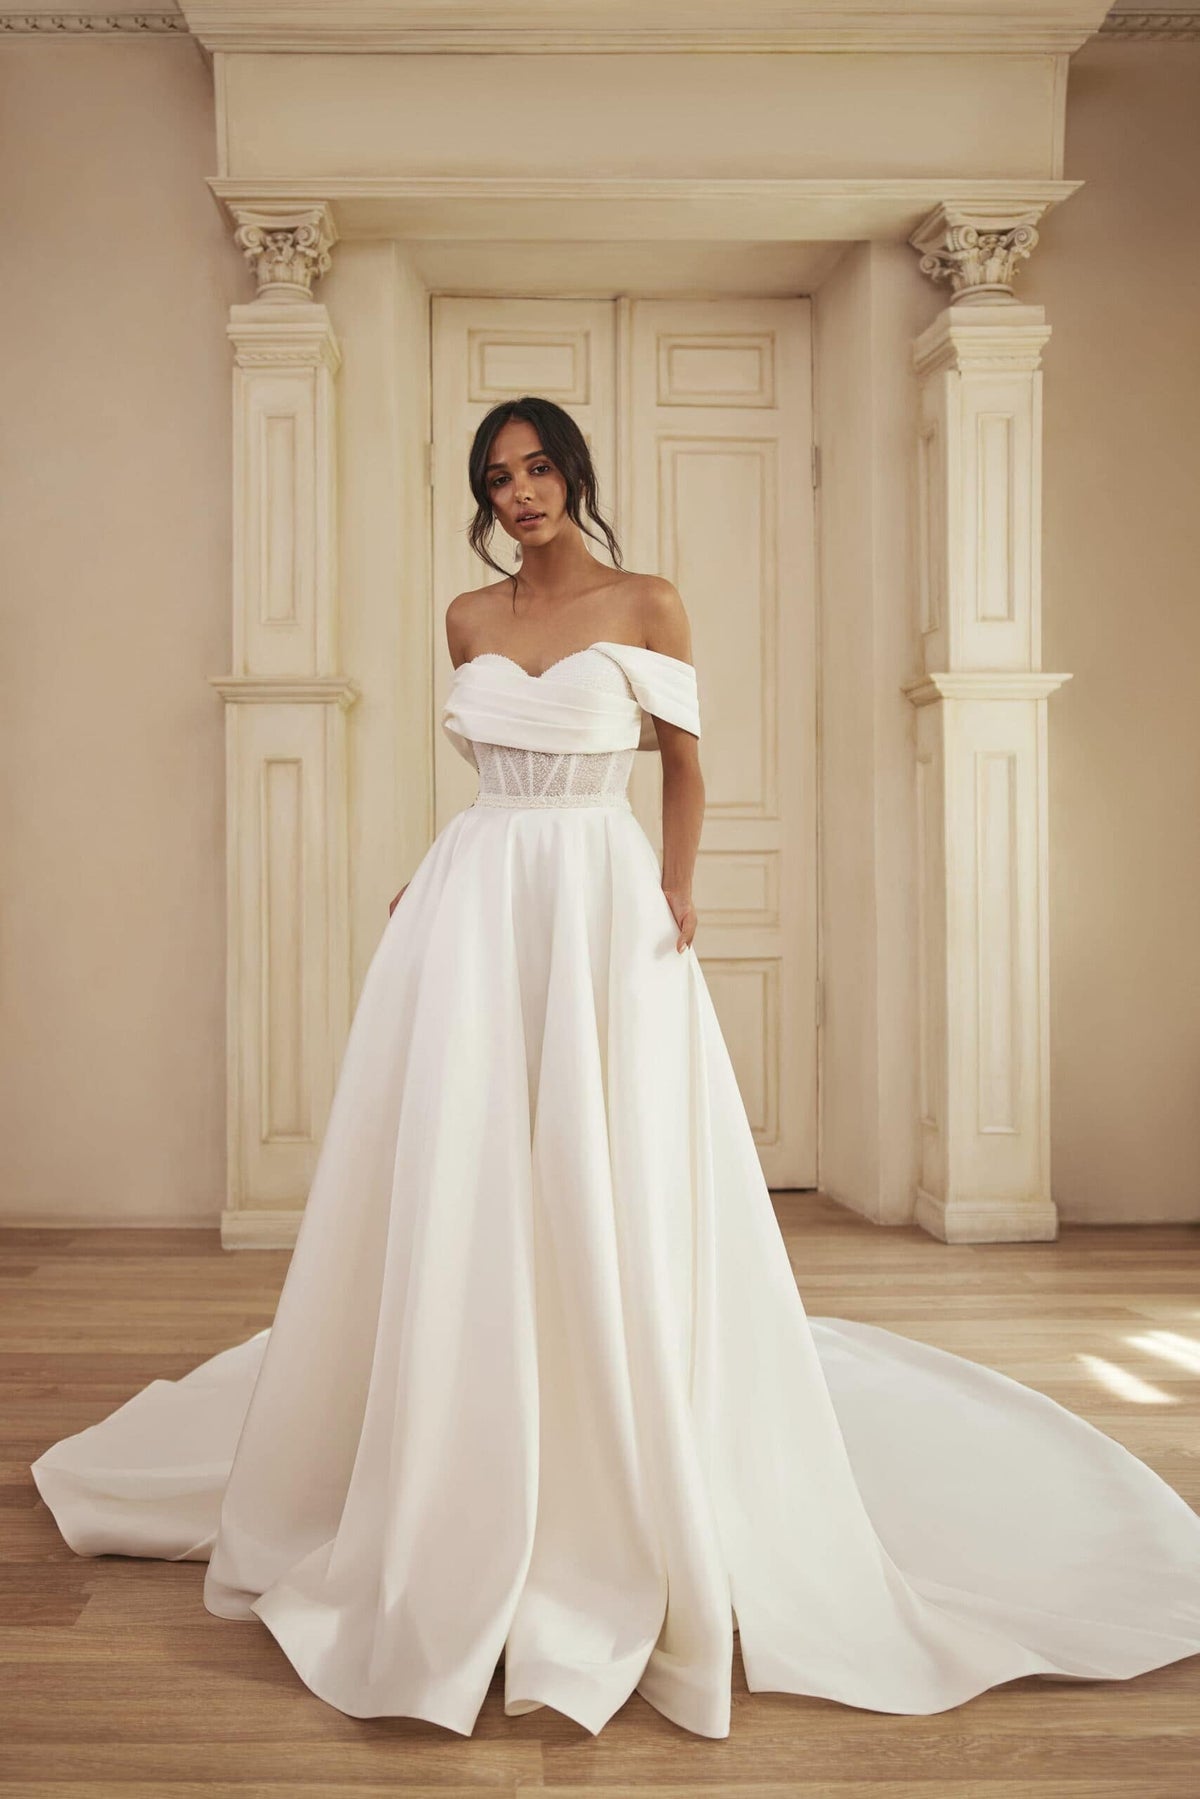 Simply Stunning Off The Shoulder Sweetheart Neckline Wedding Dress Pearl Details Aline Bridal Gown Backless Design Minimalist Style